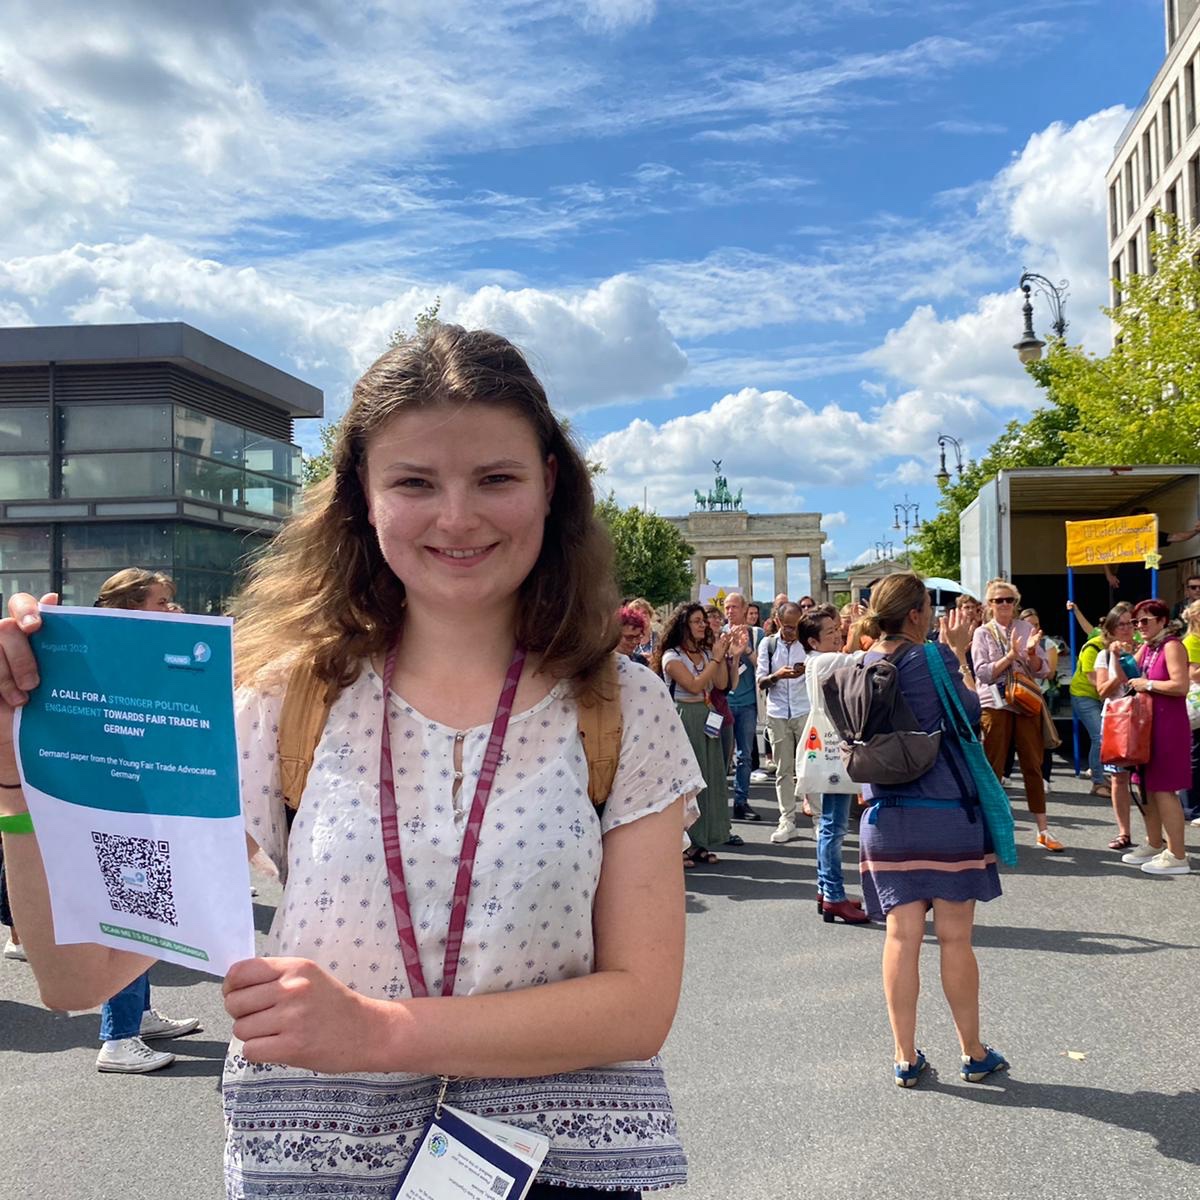 🛒Ever went shopping in front of the Brandenburgertor? 

On Tuesday, we (German YFTAs) did and participated to #ForumFairerHandel's political action on the Corporate Sustainability Due Diligence Directive (CSDDD).